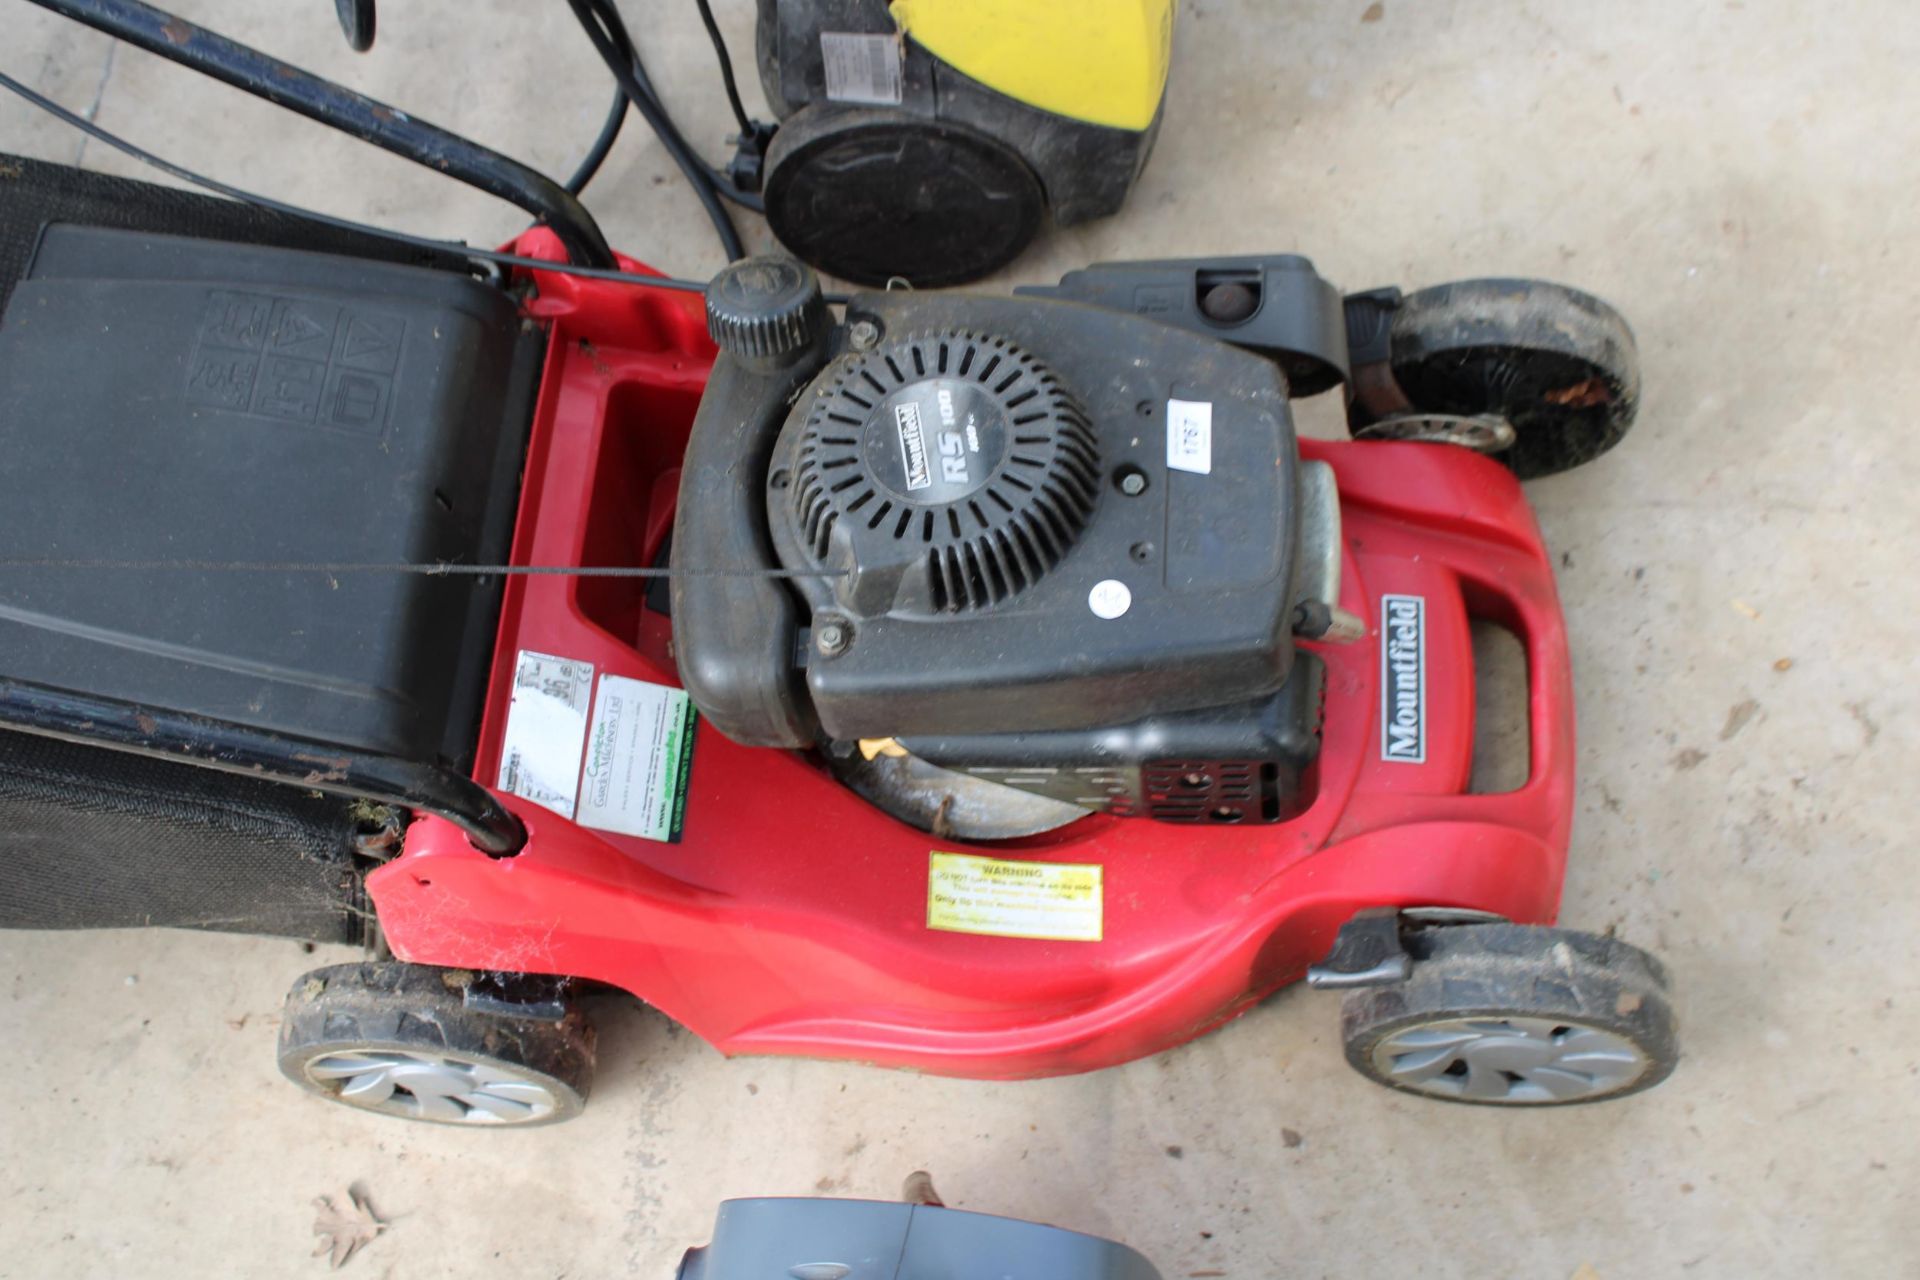 A MOUNTFIELD RS100 PETROL LAWN MOWER WITH GRASS BOX - Image 2 of 3